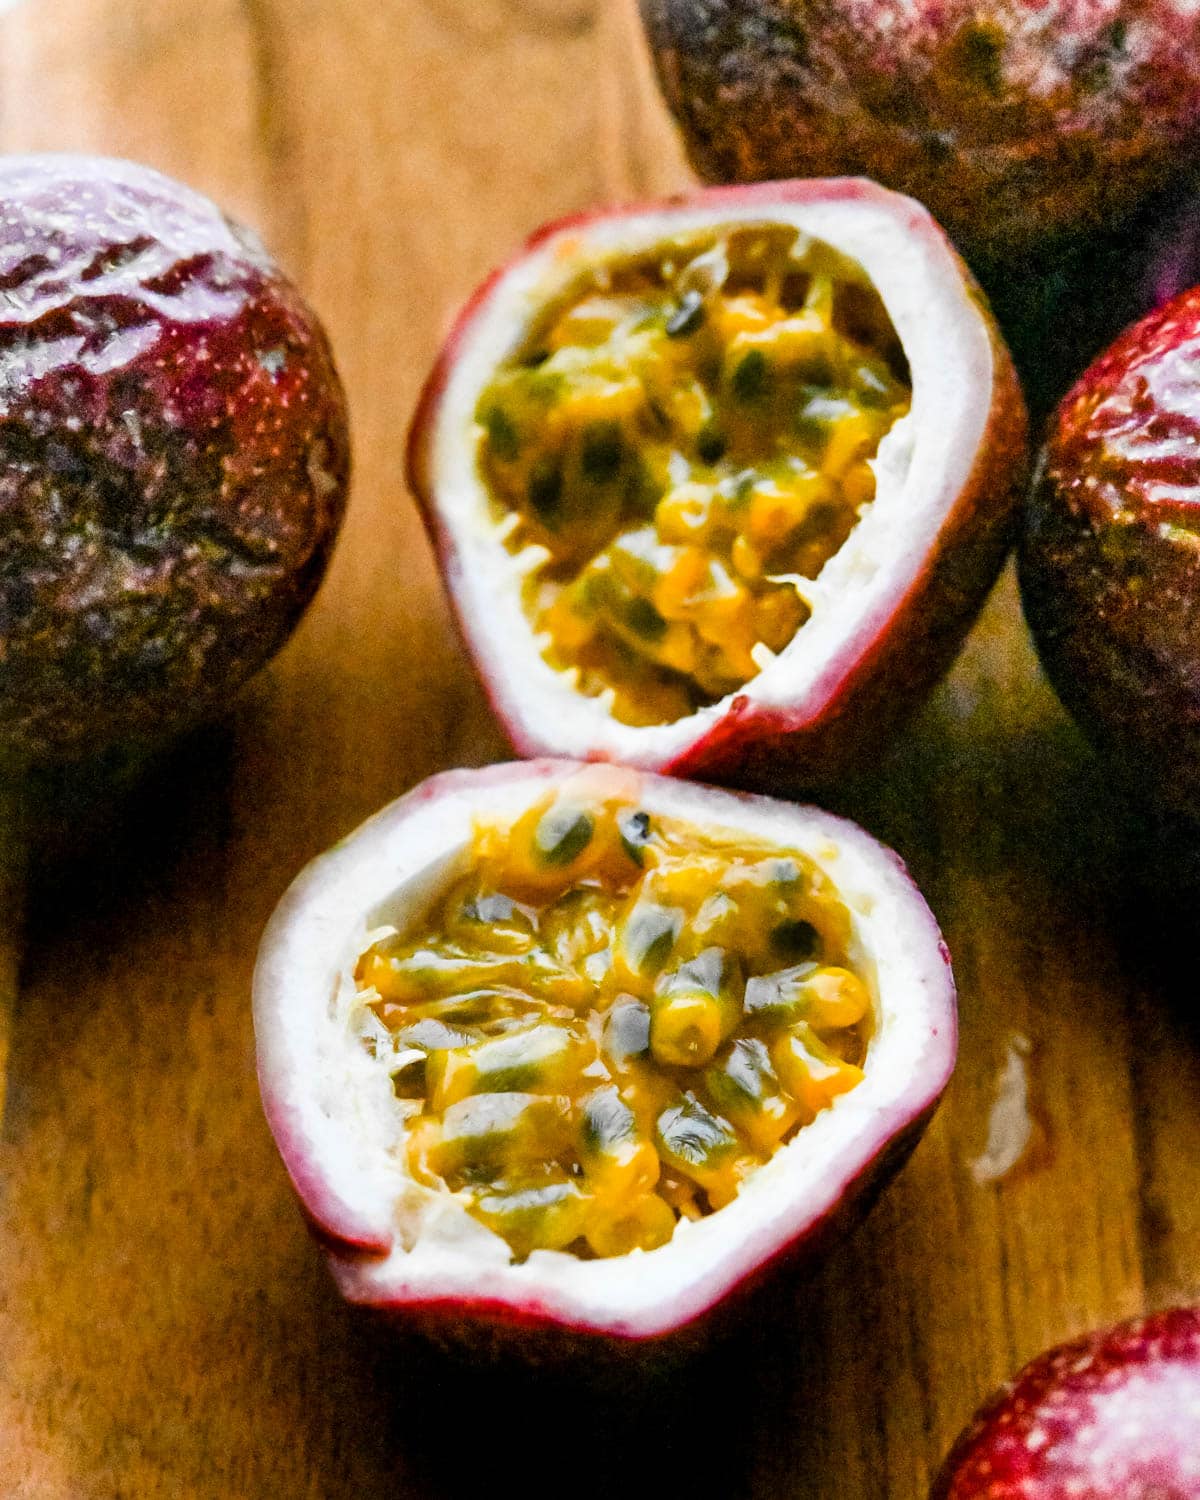 Slicing passion fruit in half to reveal the pulp inside.